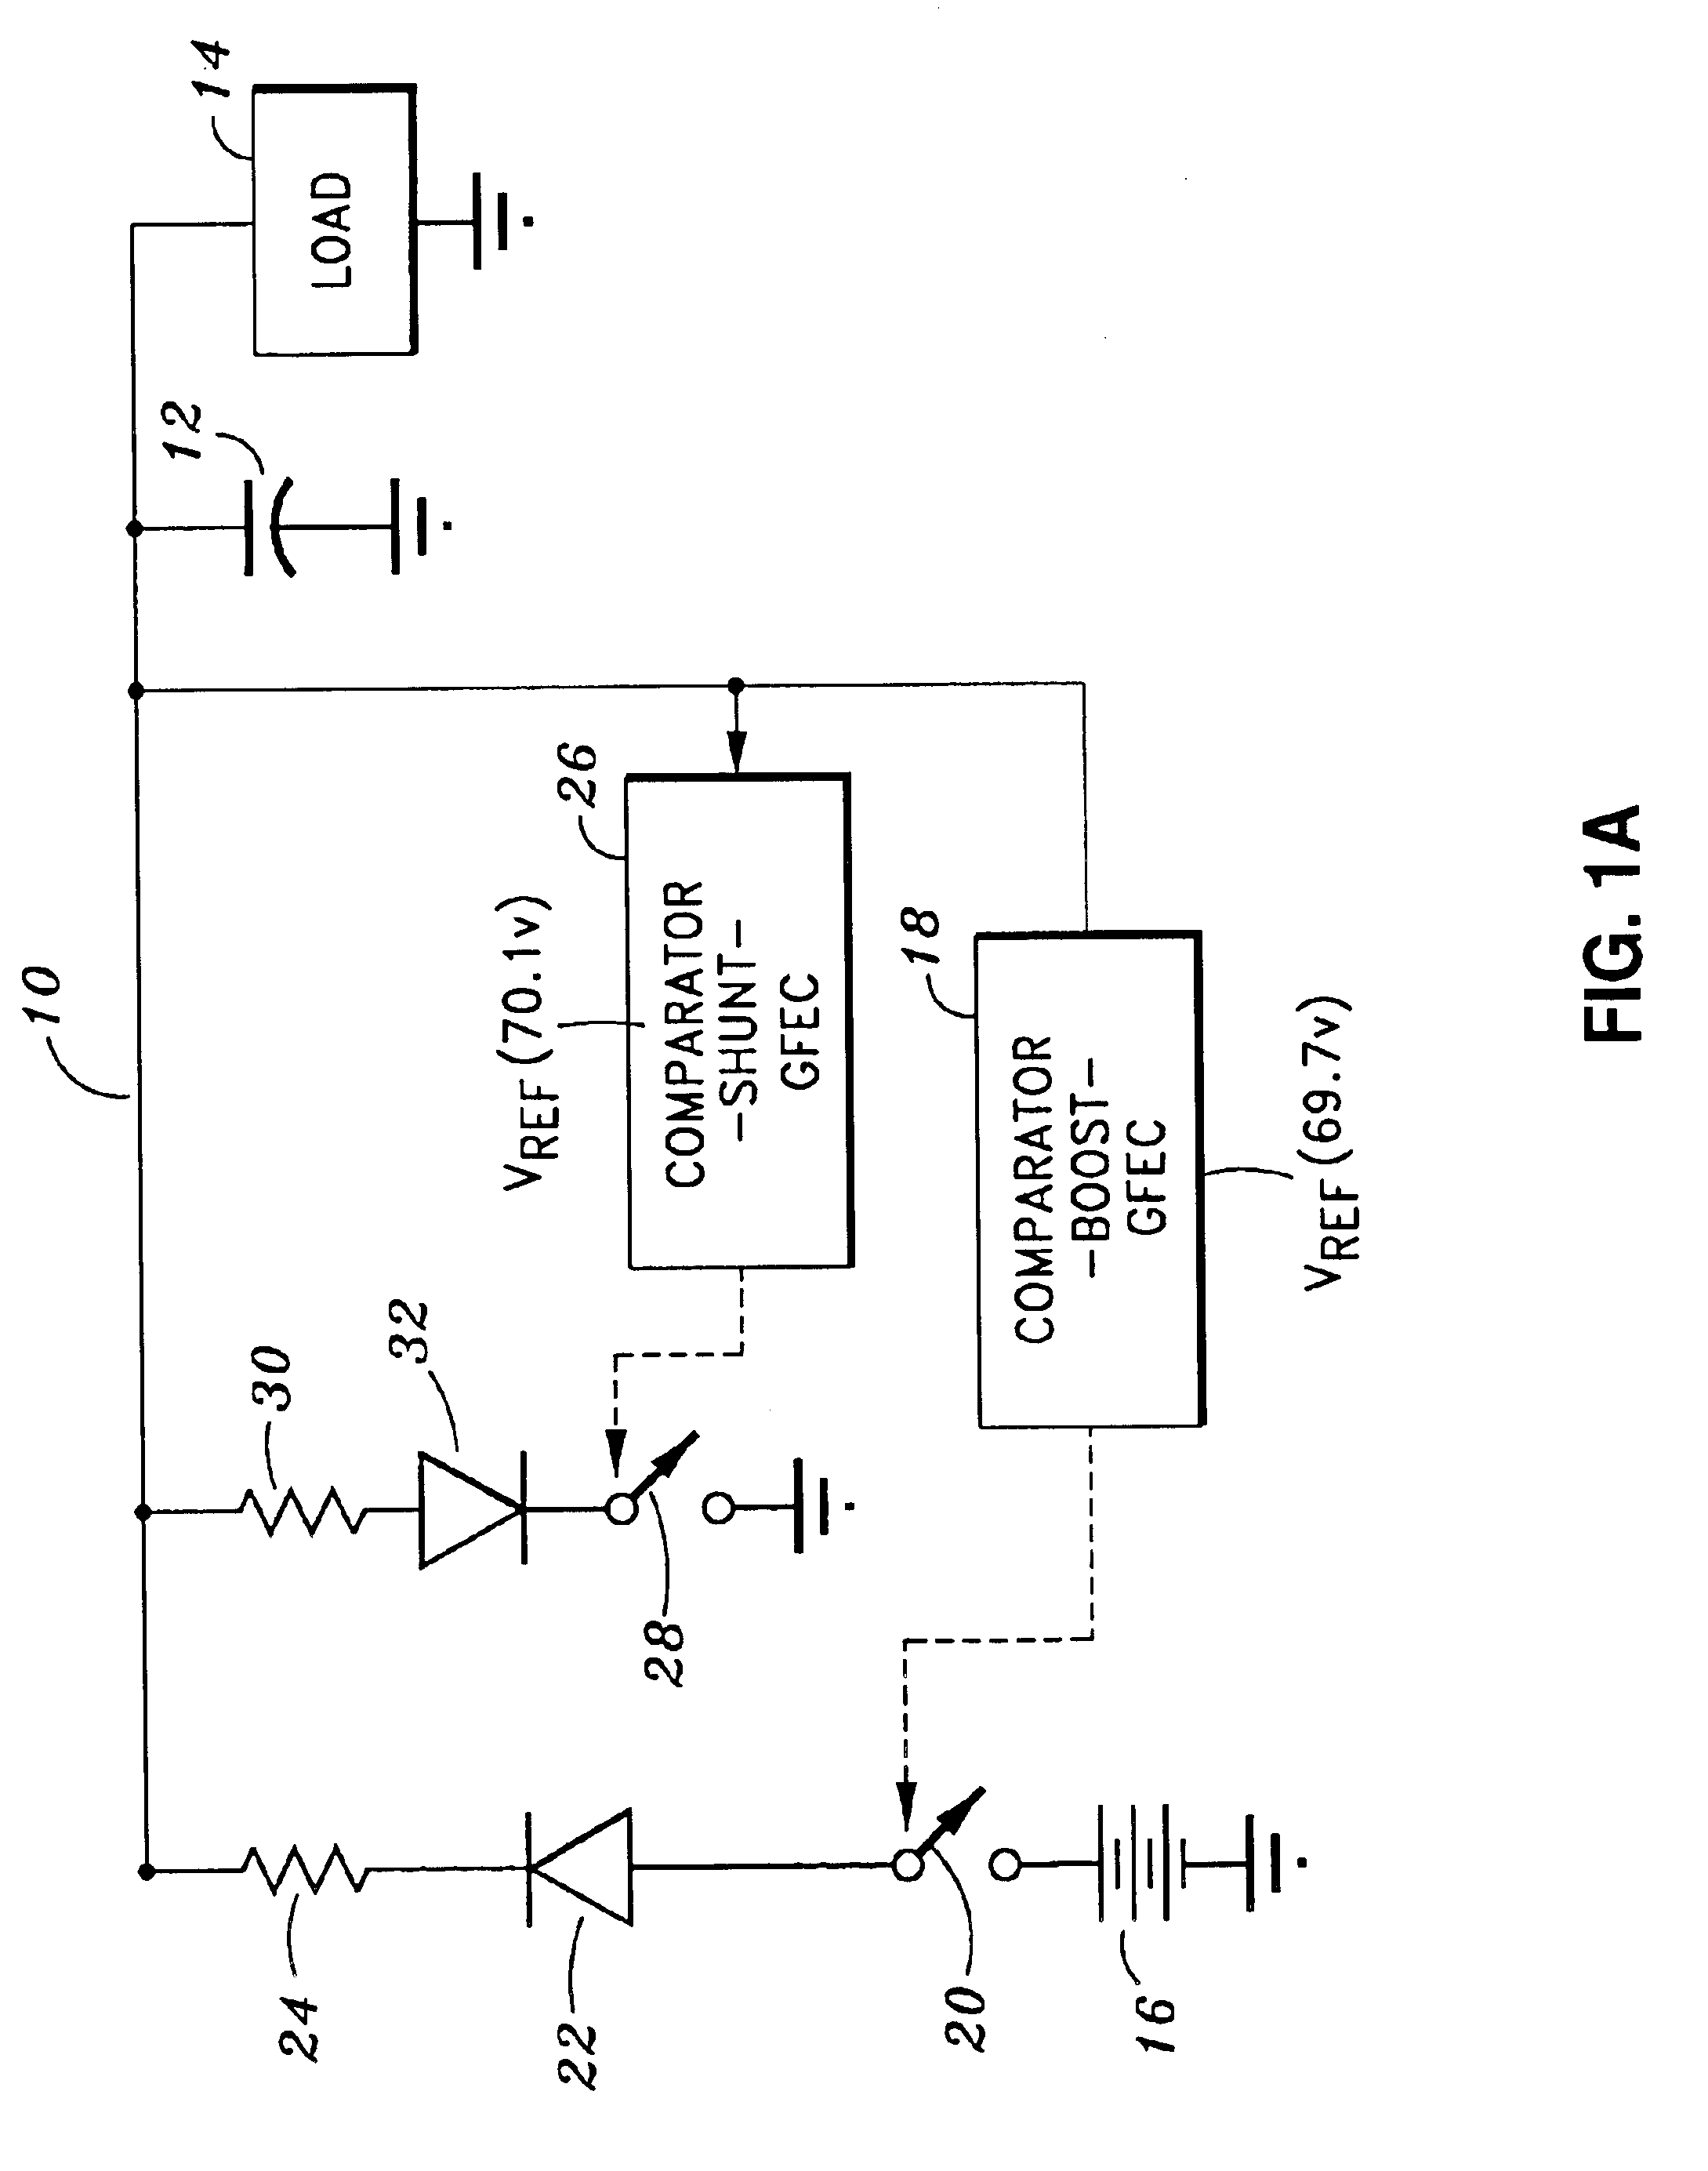 Bus voltage control using gated fixed energy pulses